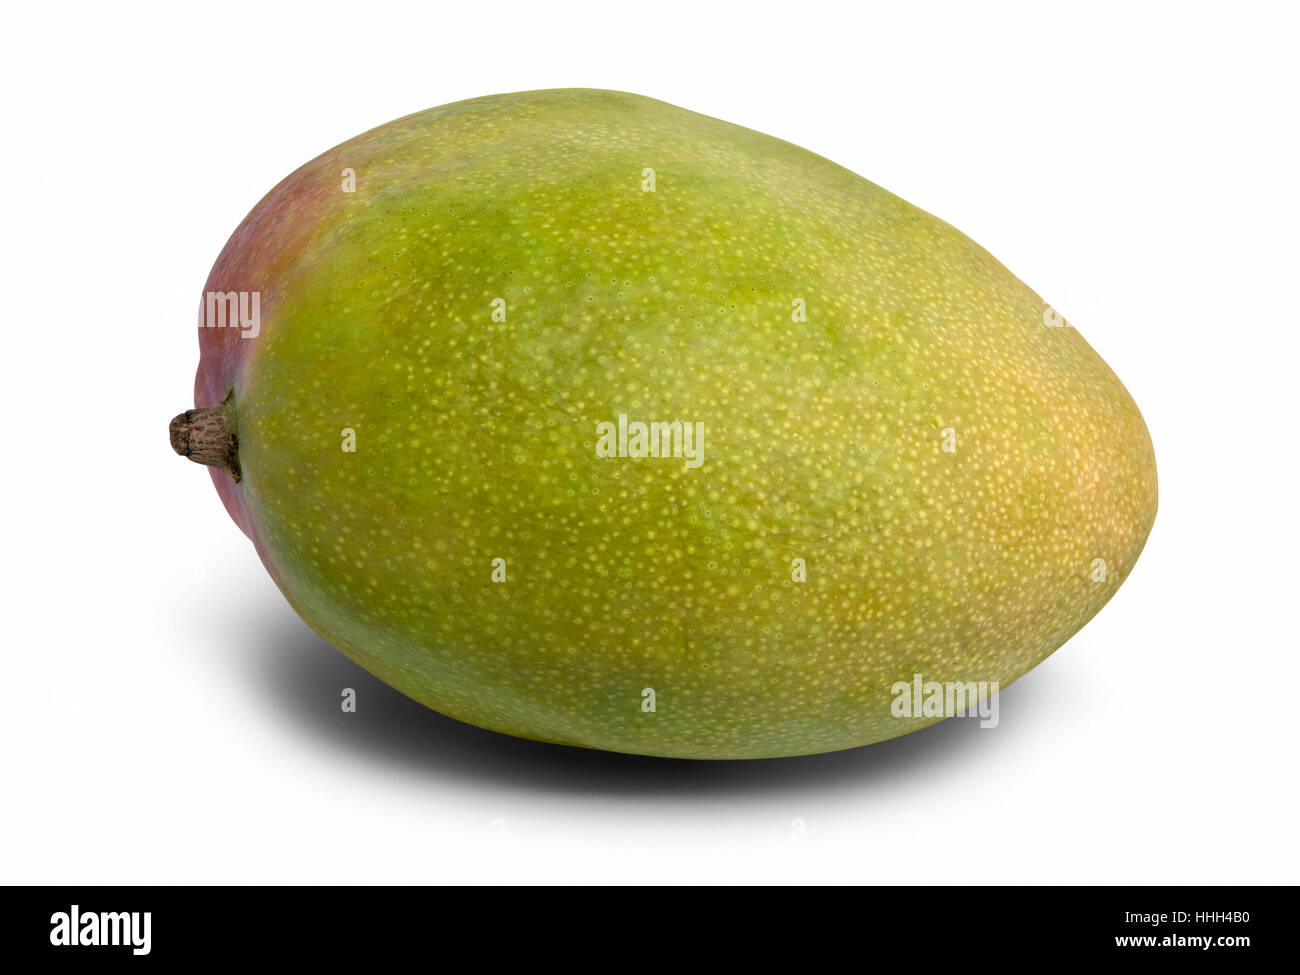 Mango Fruits Ripen And Rotten On A White Background Stock Photo - Download  Image Now - iStock